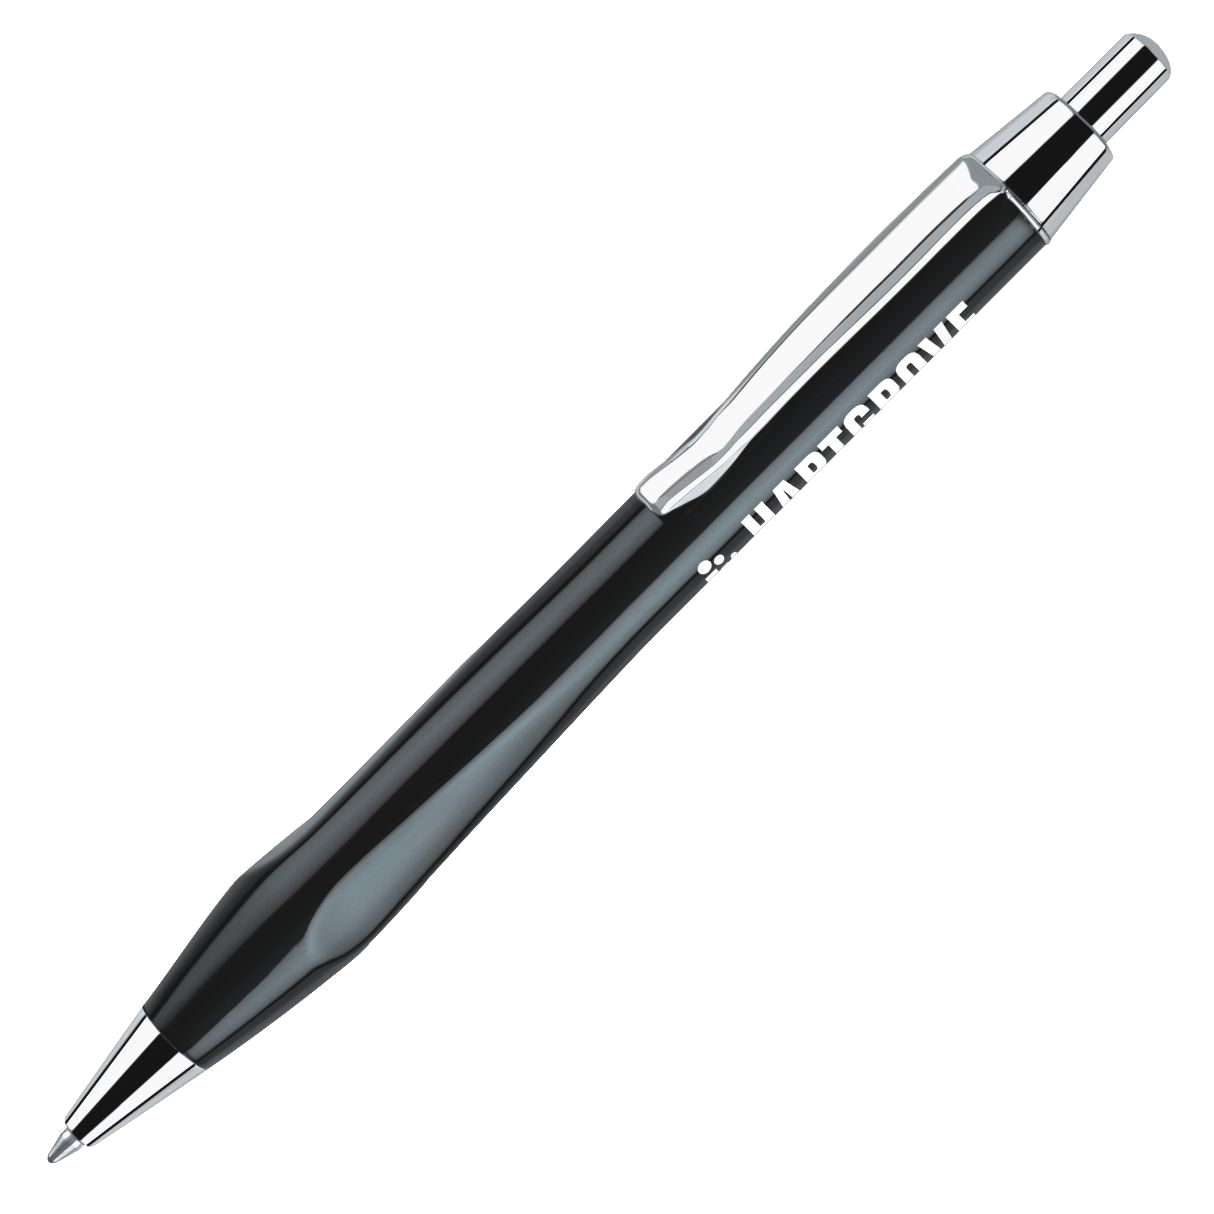 Pen In Hand Png image #43195